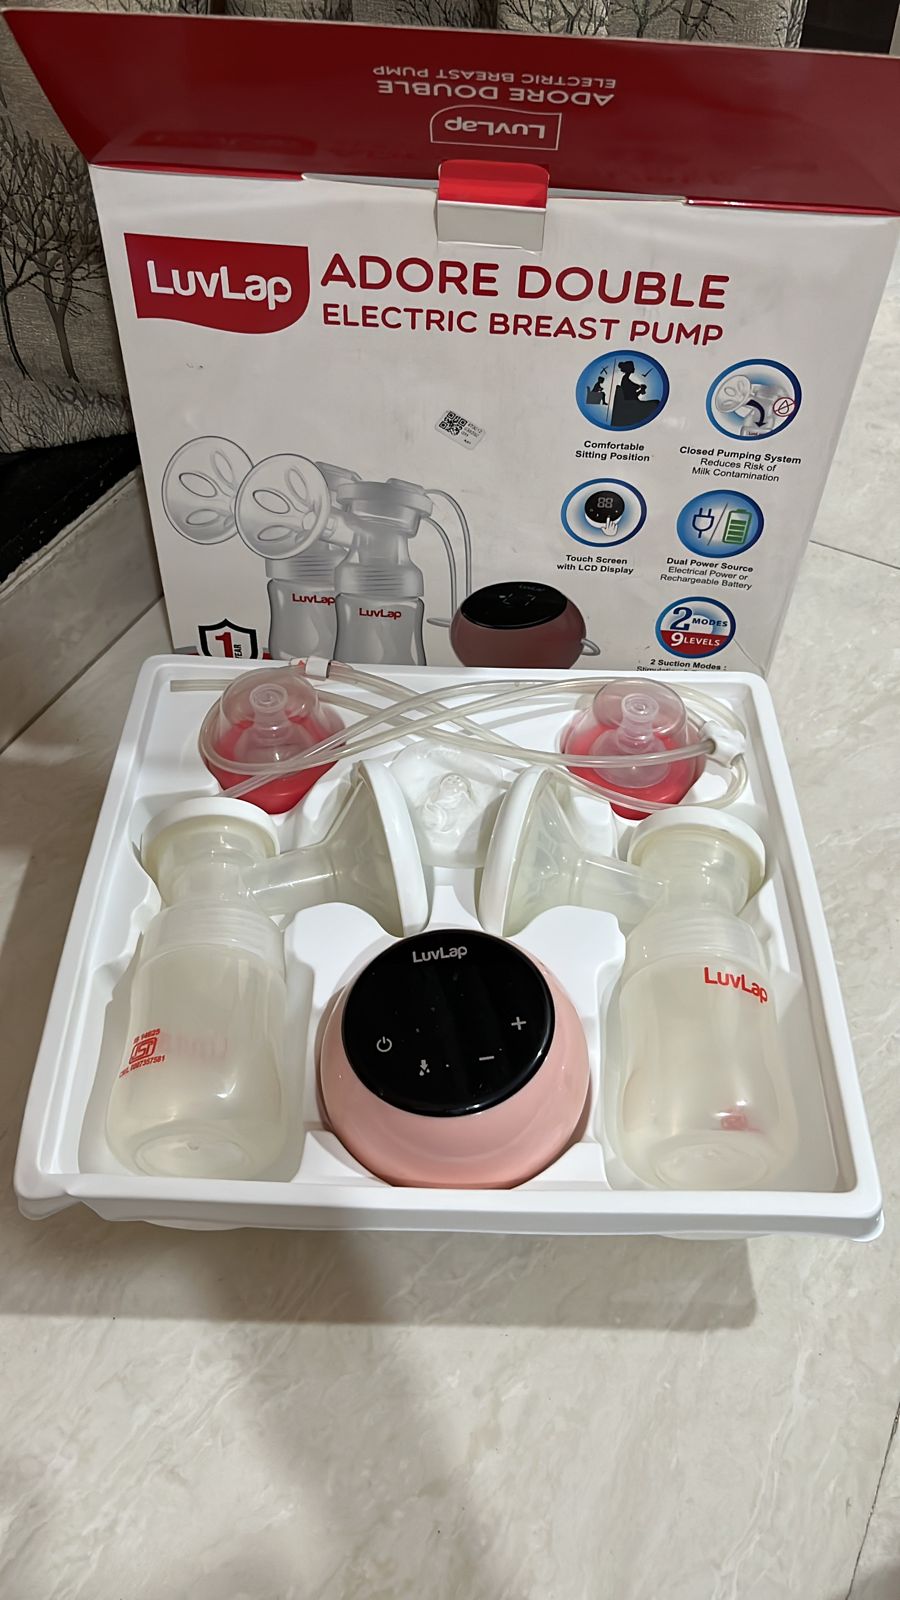 Luvlap Adore Double Electric Breast Pump